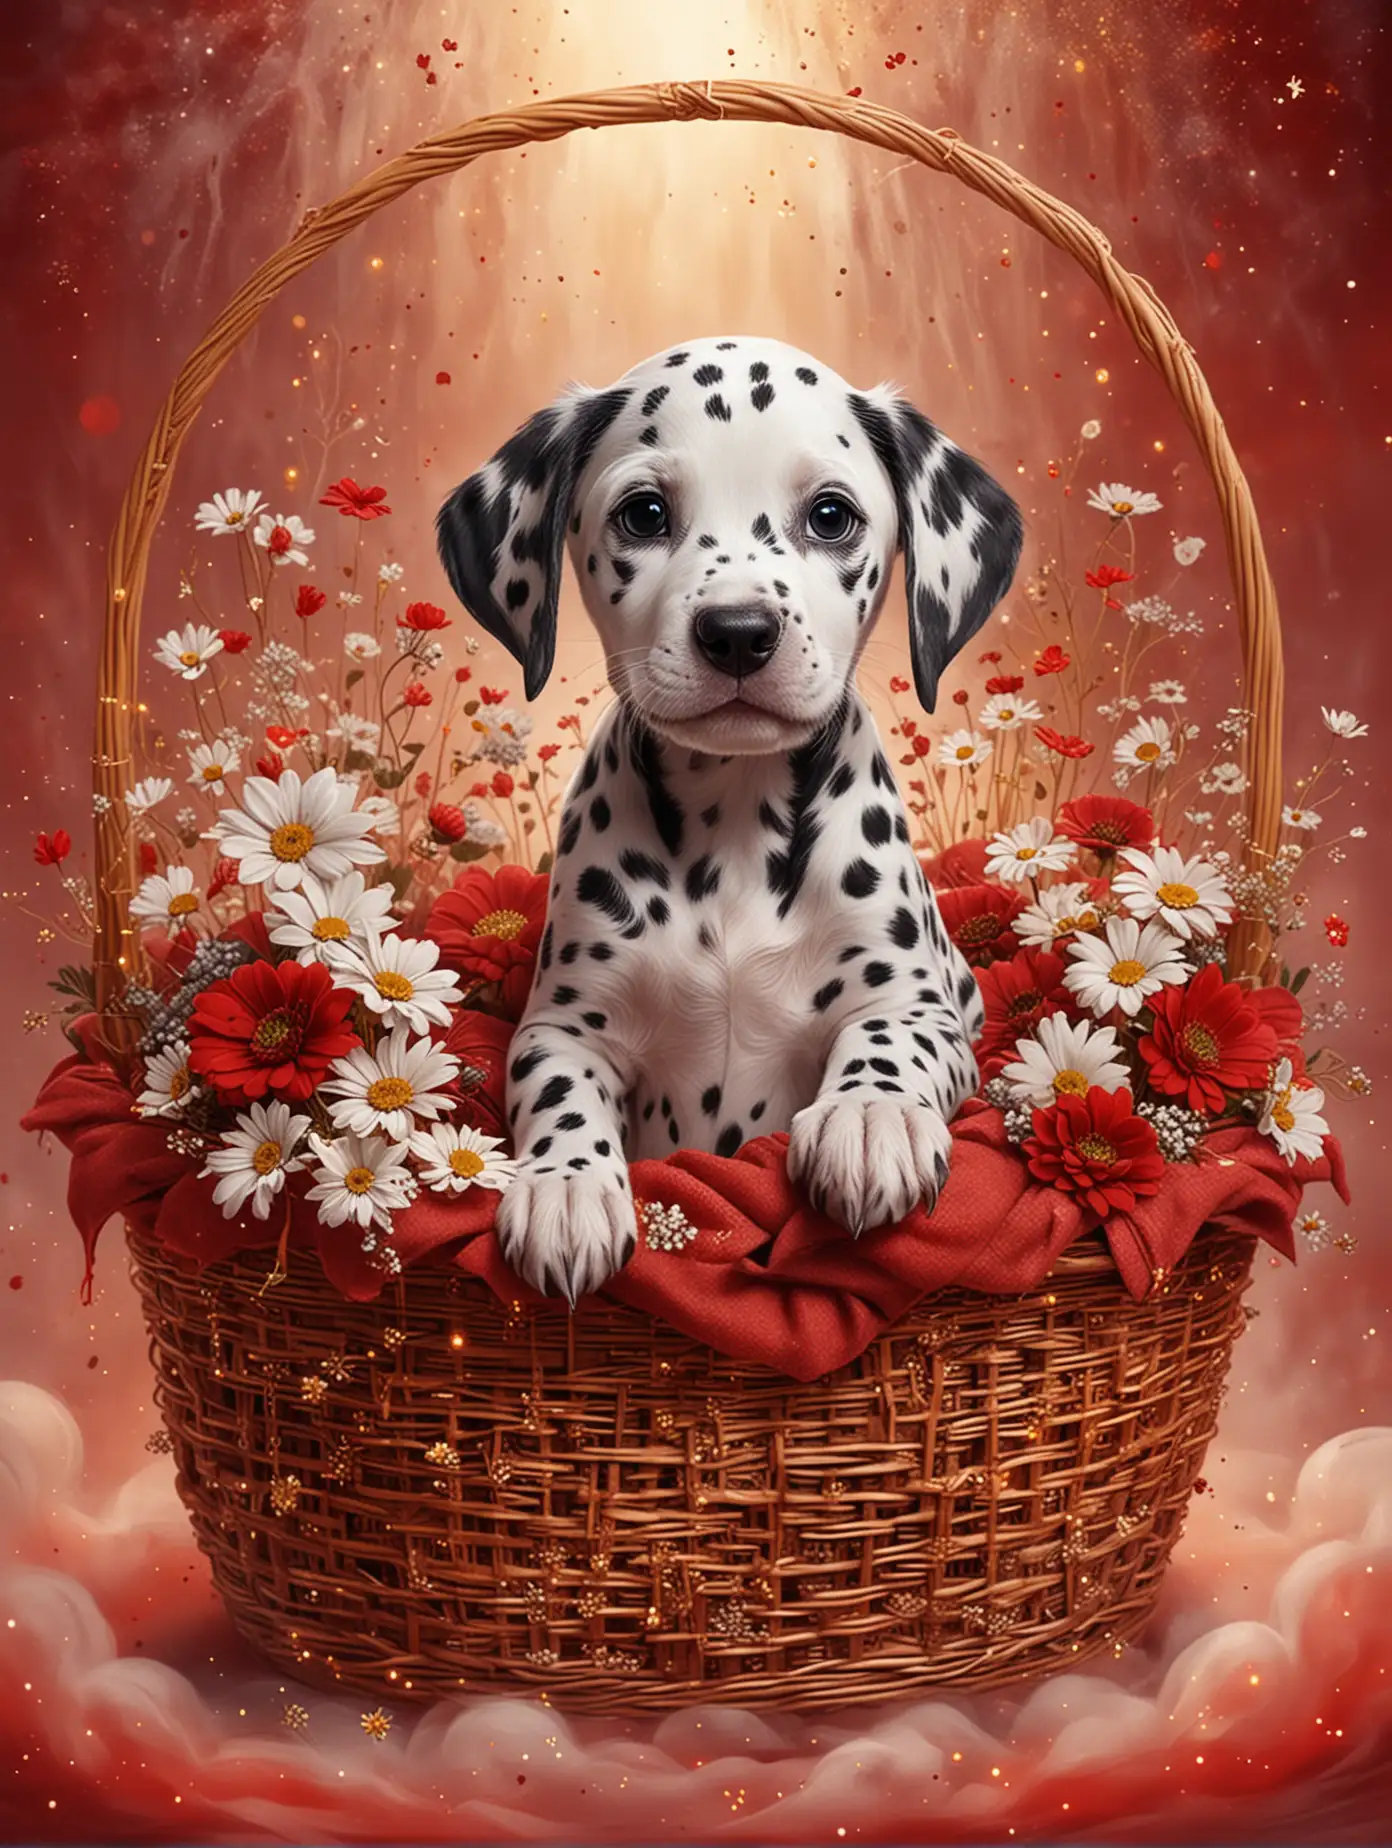 Illustration of a dalmatian puppy inside a basket, there are flowers, magical swirls, red fog, gold sparks